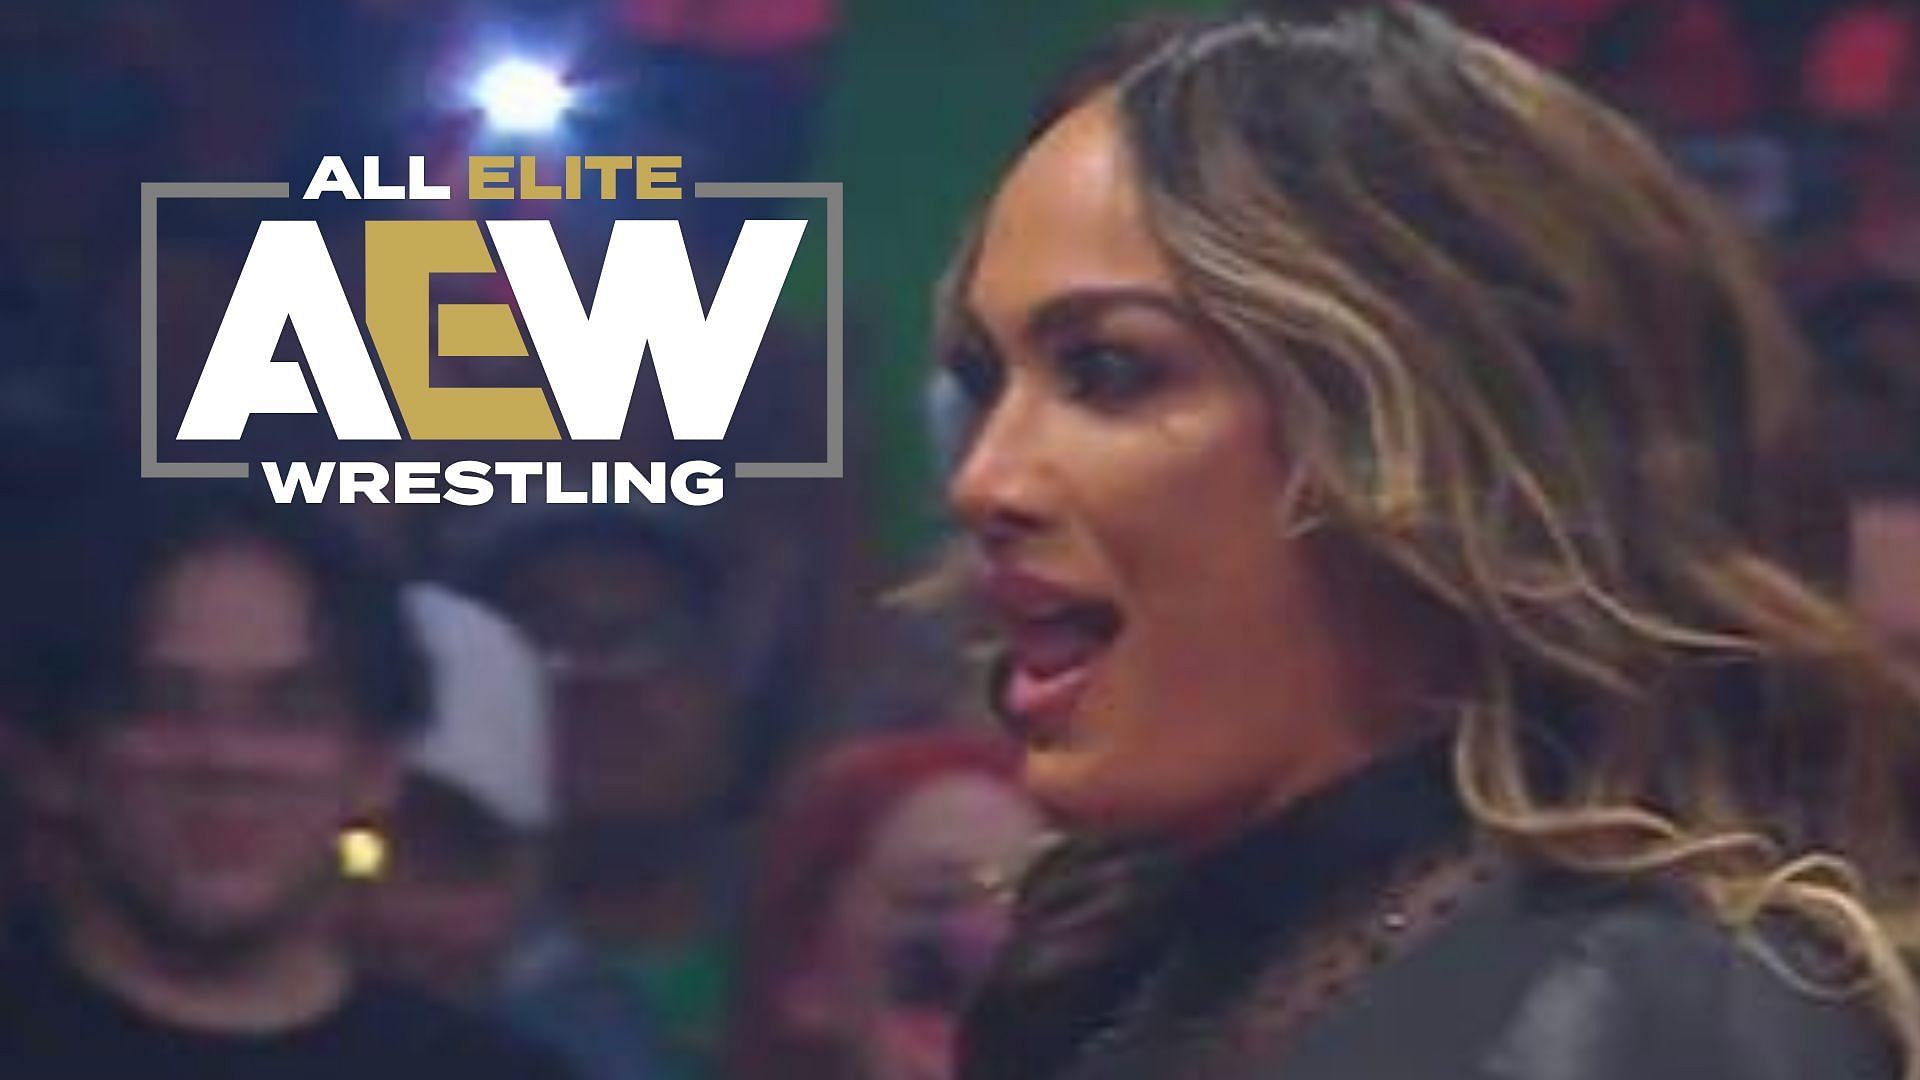 When did Nia Jax think of joining AEW?